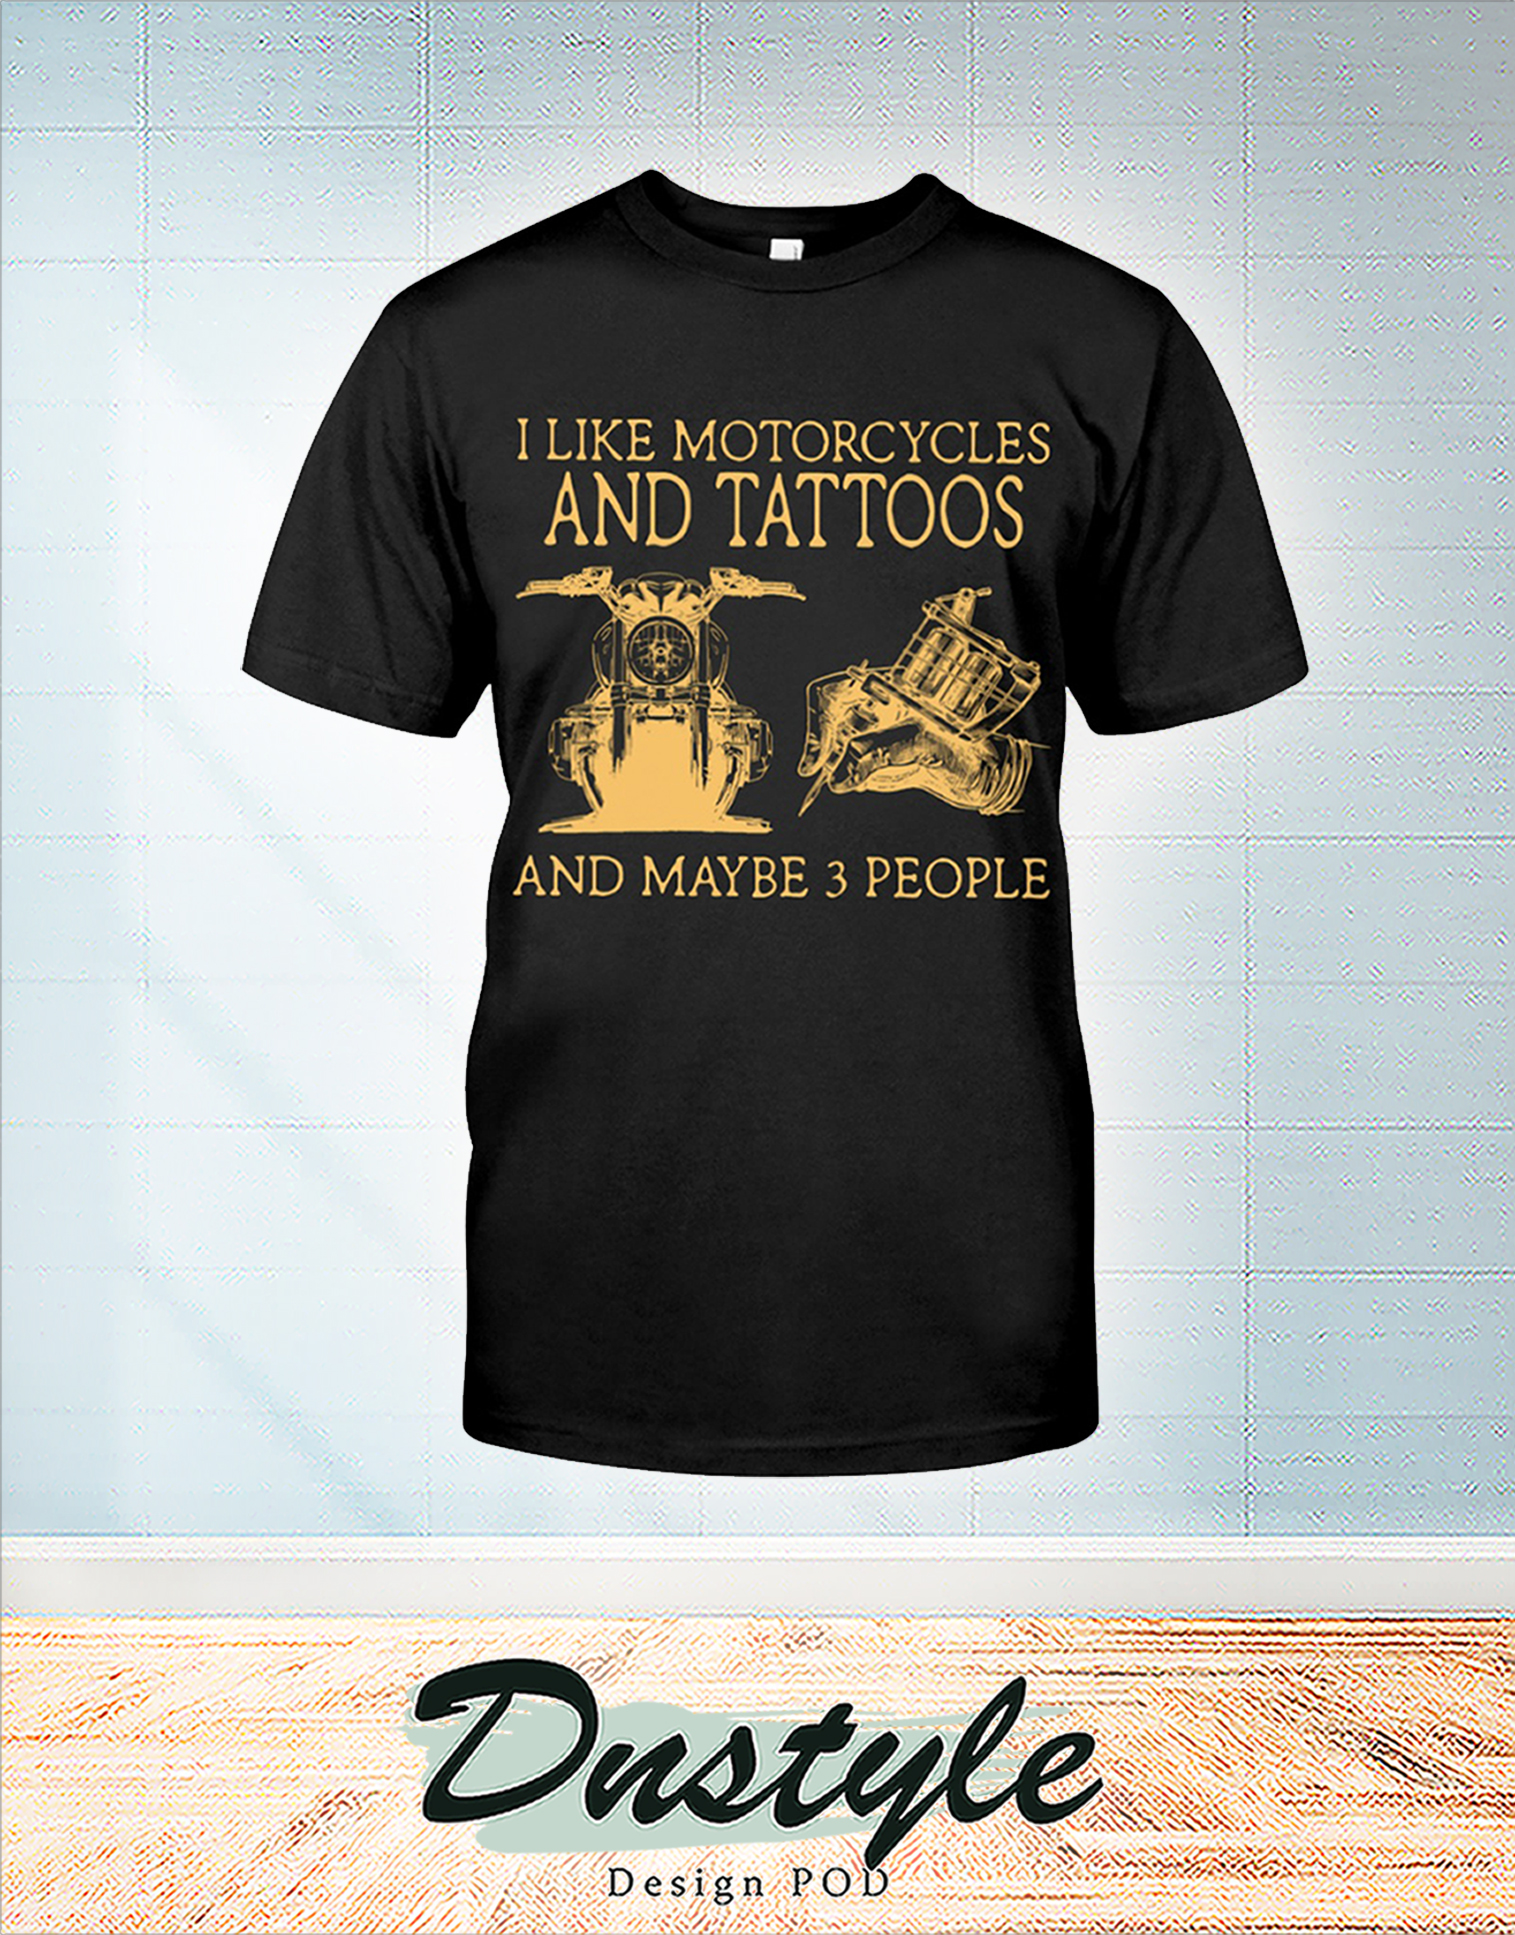 I like motorcycles and tattoos and maybe 3 people t-shirt